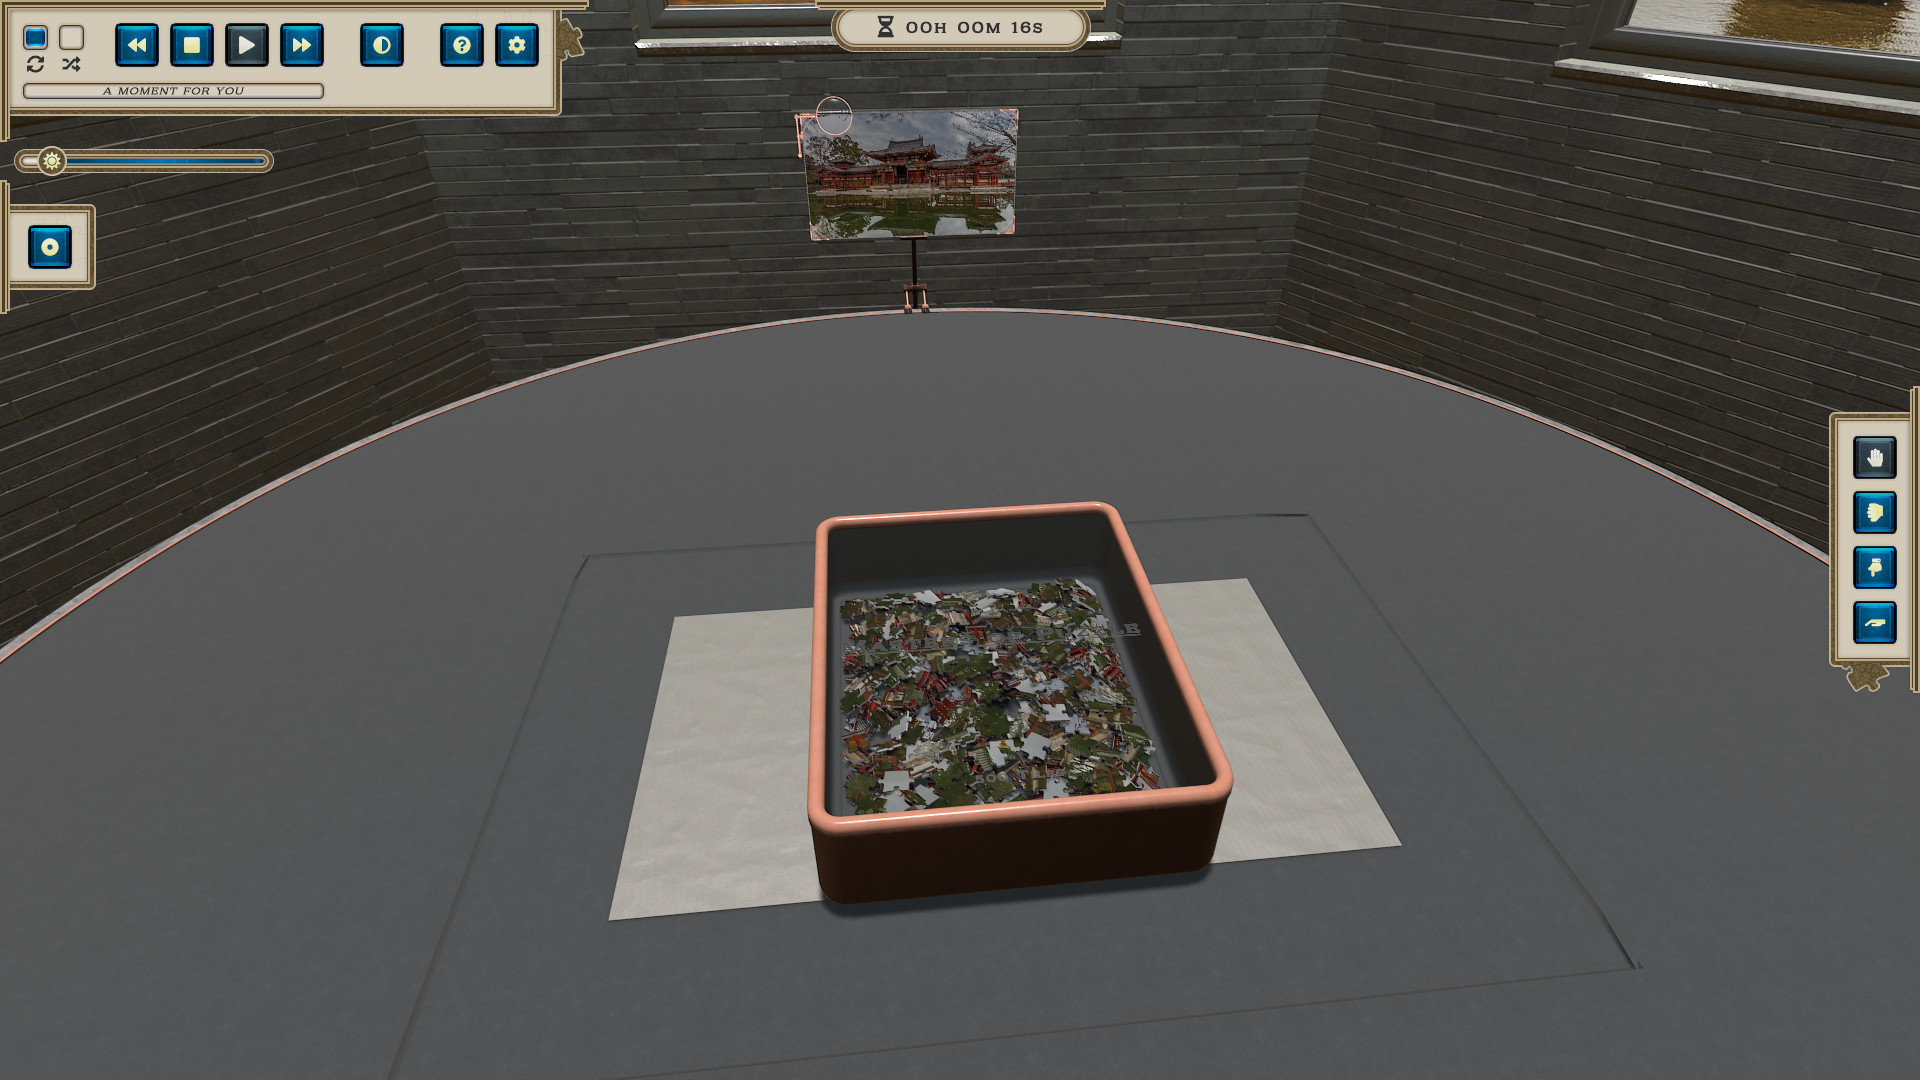 Masters of Puzzle - Byodoin Reflection screenshot